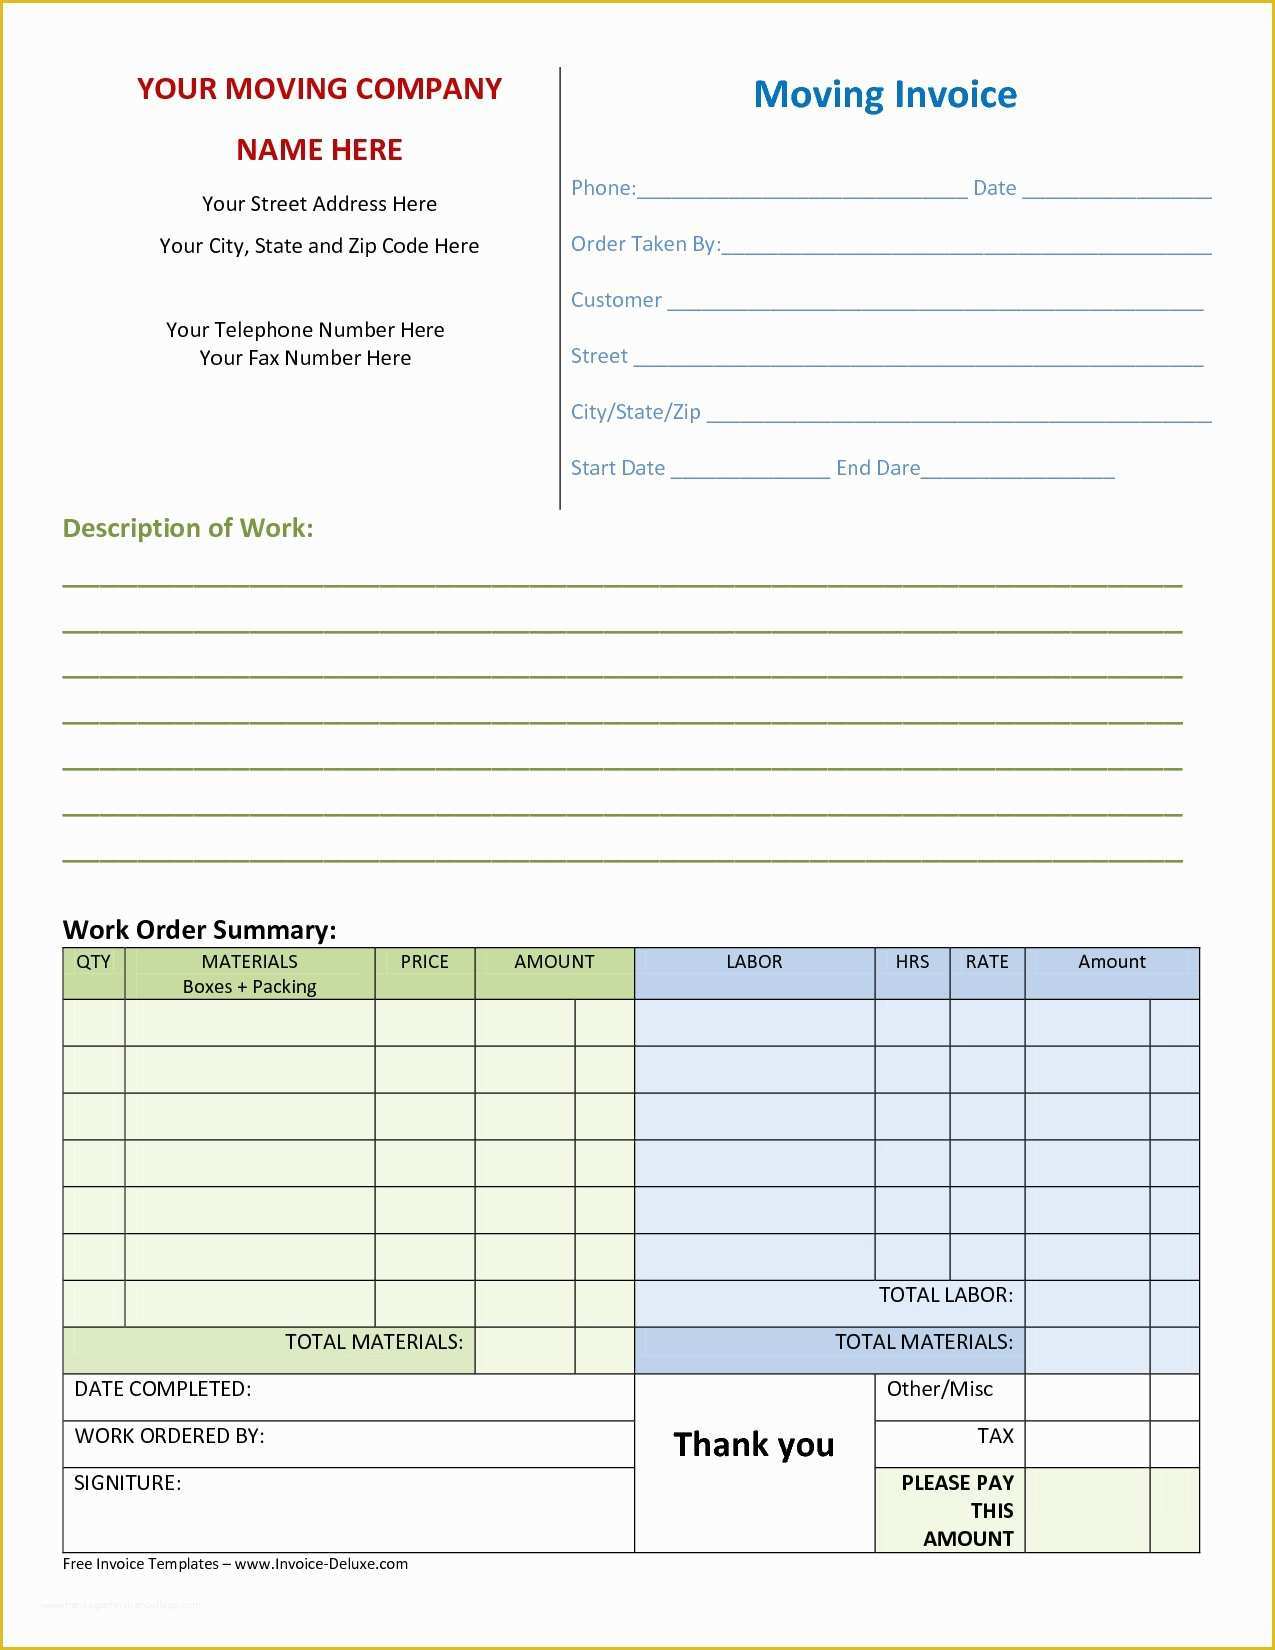 Free Online Invoice Template Of Moving Invoice Template Invoice Template Ideas